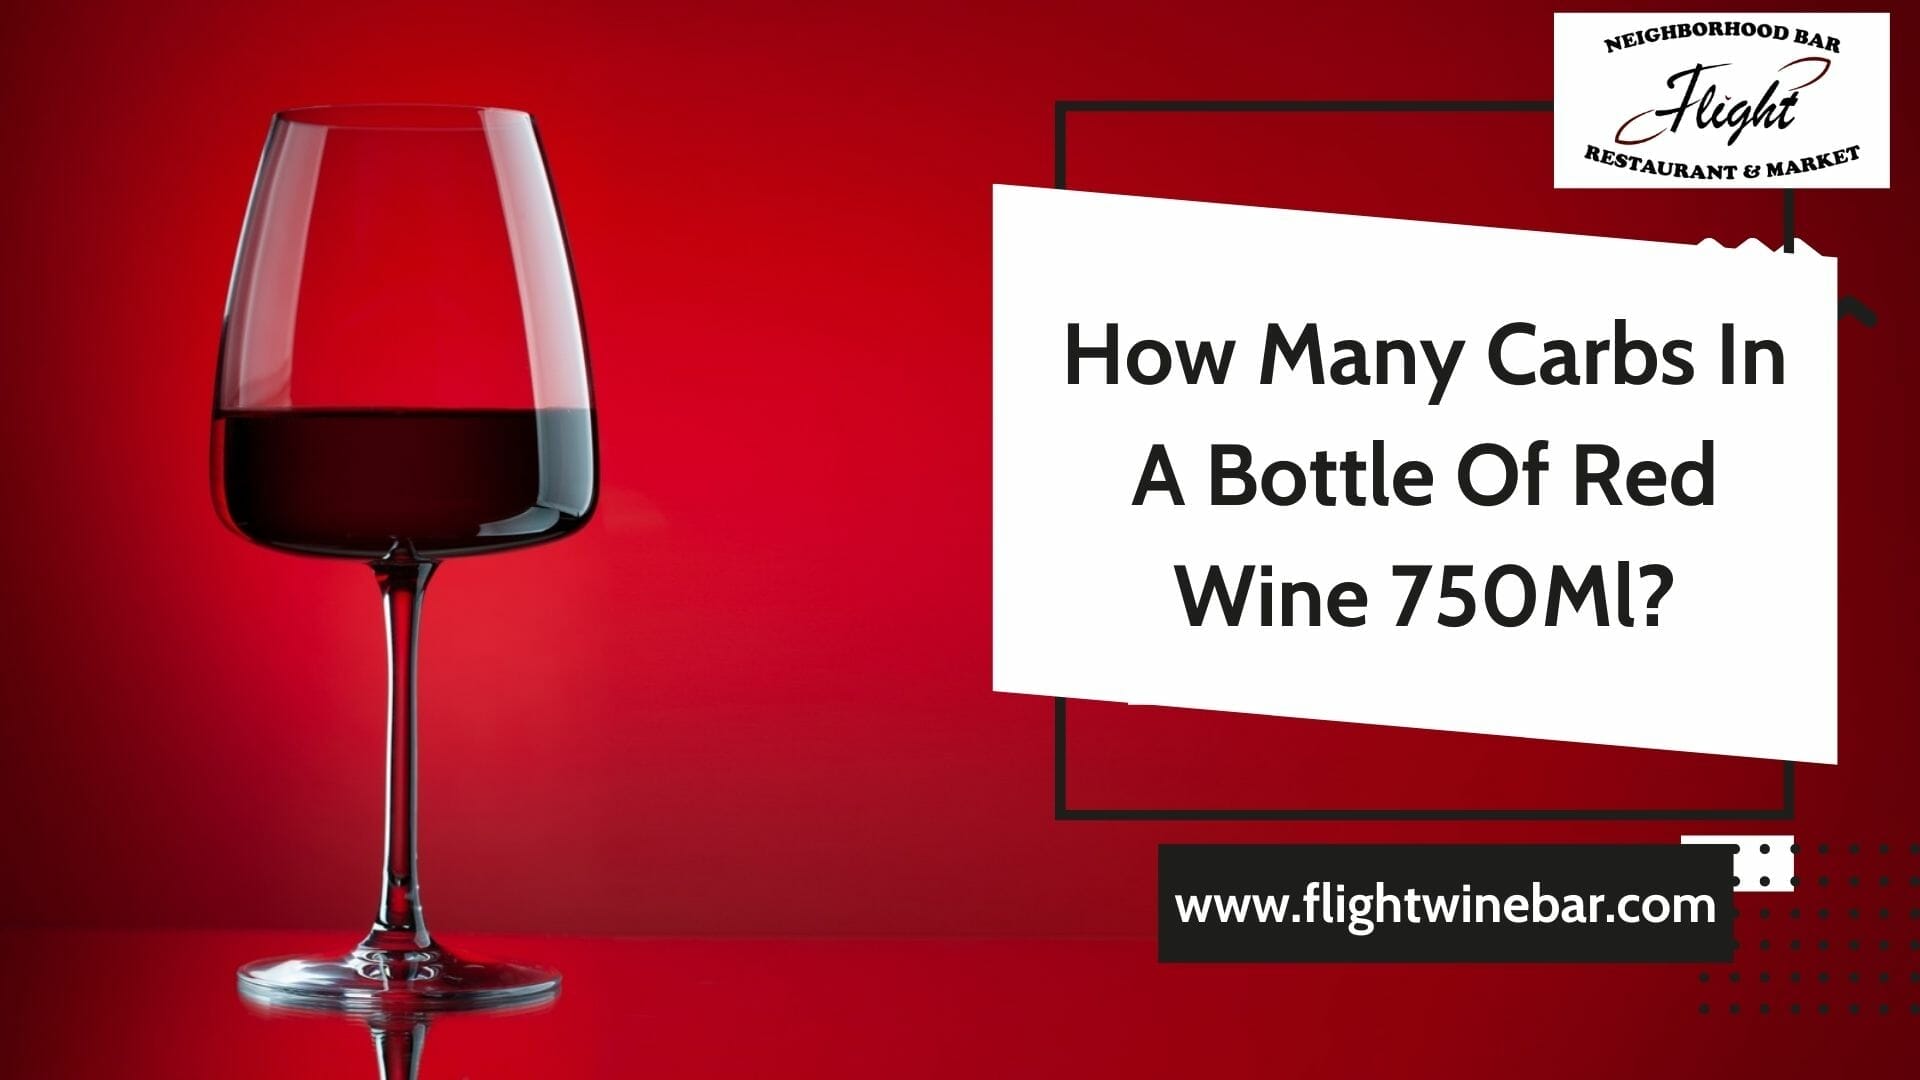 How Many Carbs In A Bottle Of Red Wine 750Ml